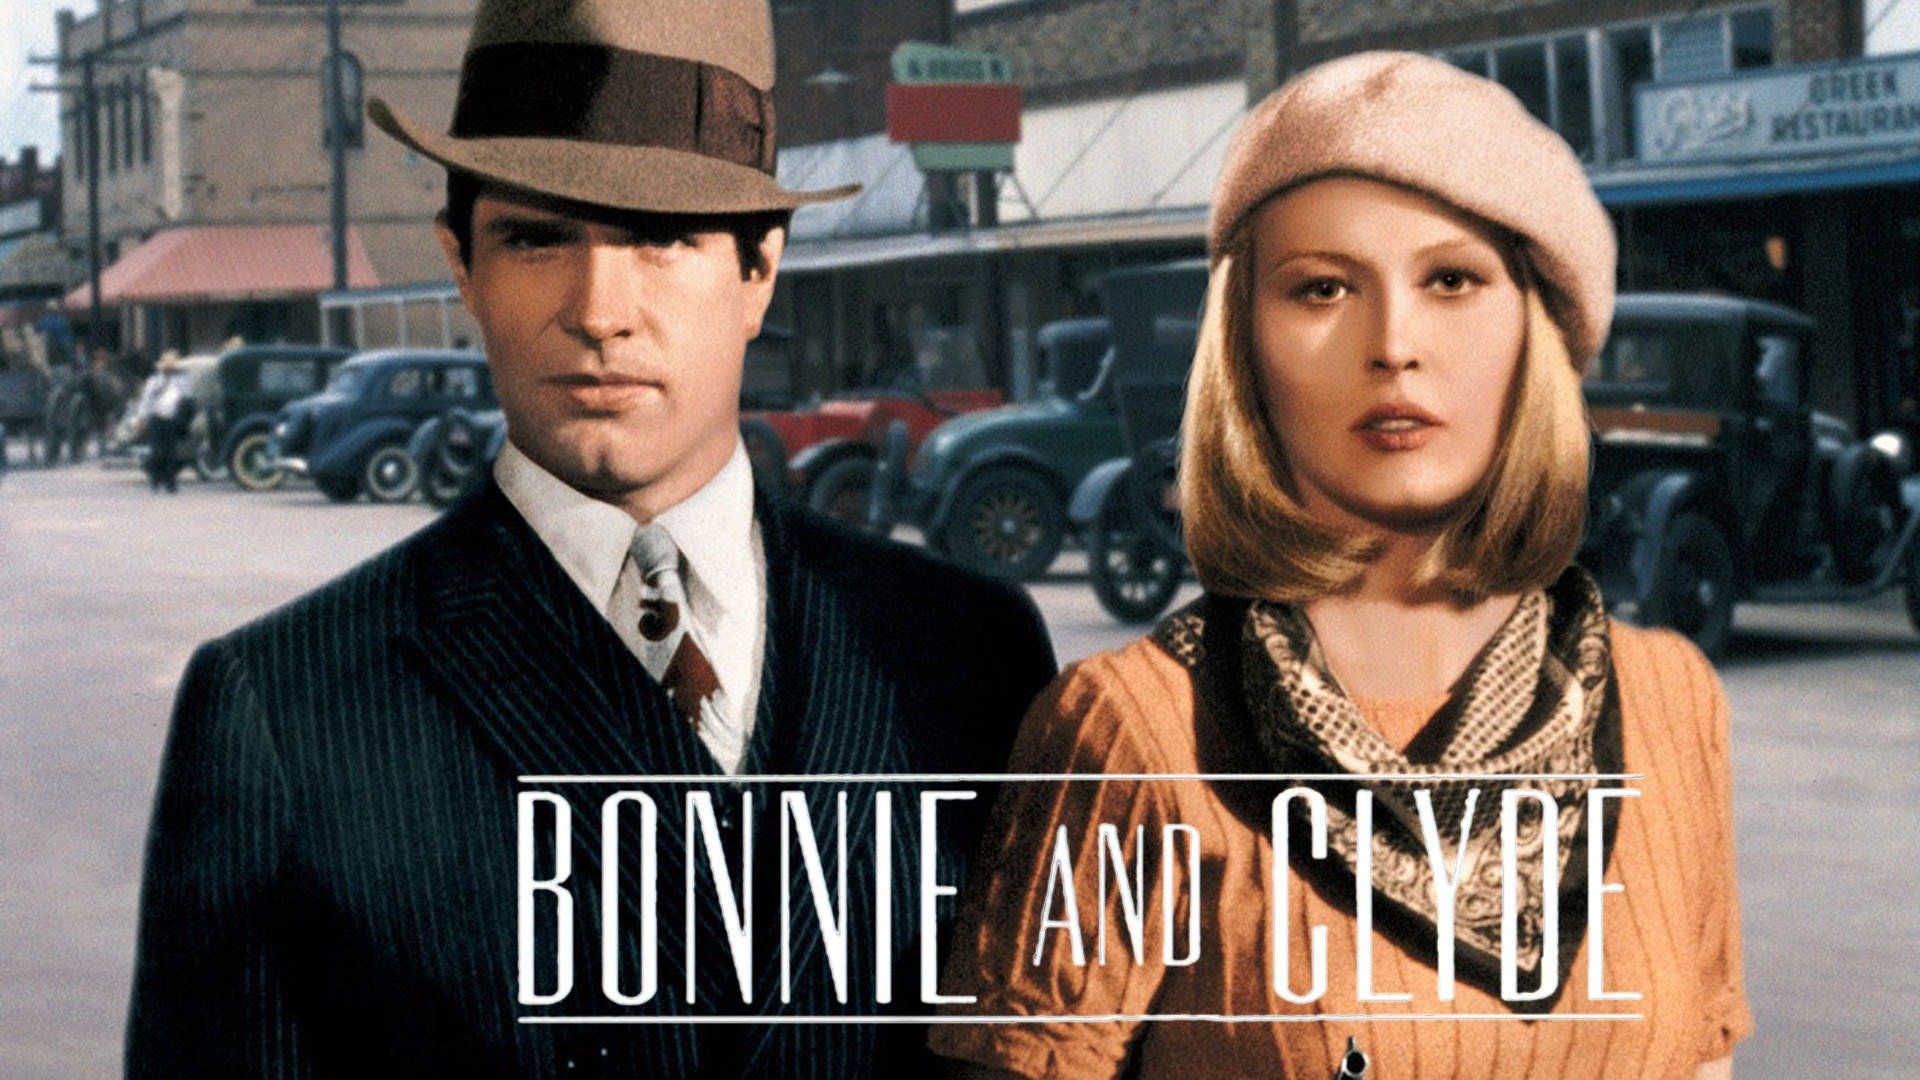 Bonnie and Clyde Trailer 1 Trailers & Videos Rotten Tomatoes